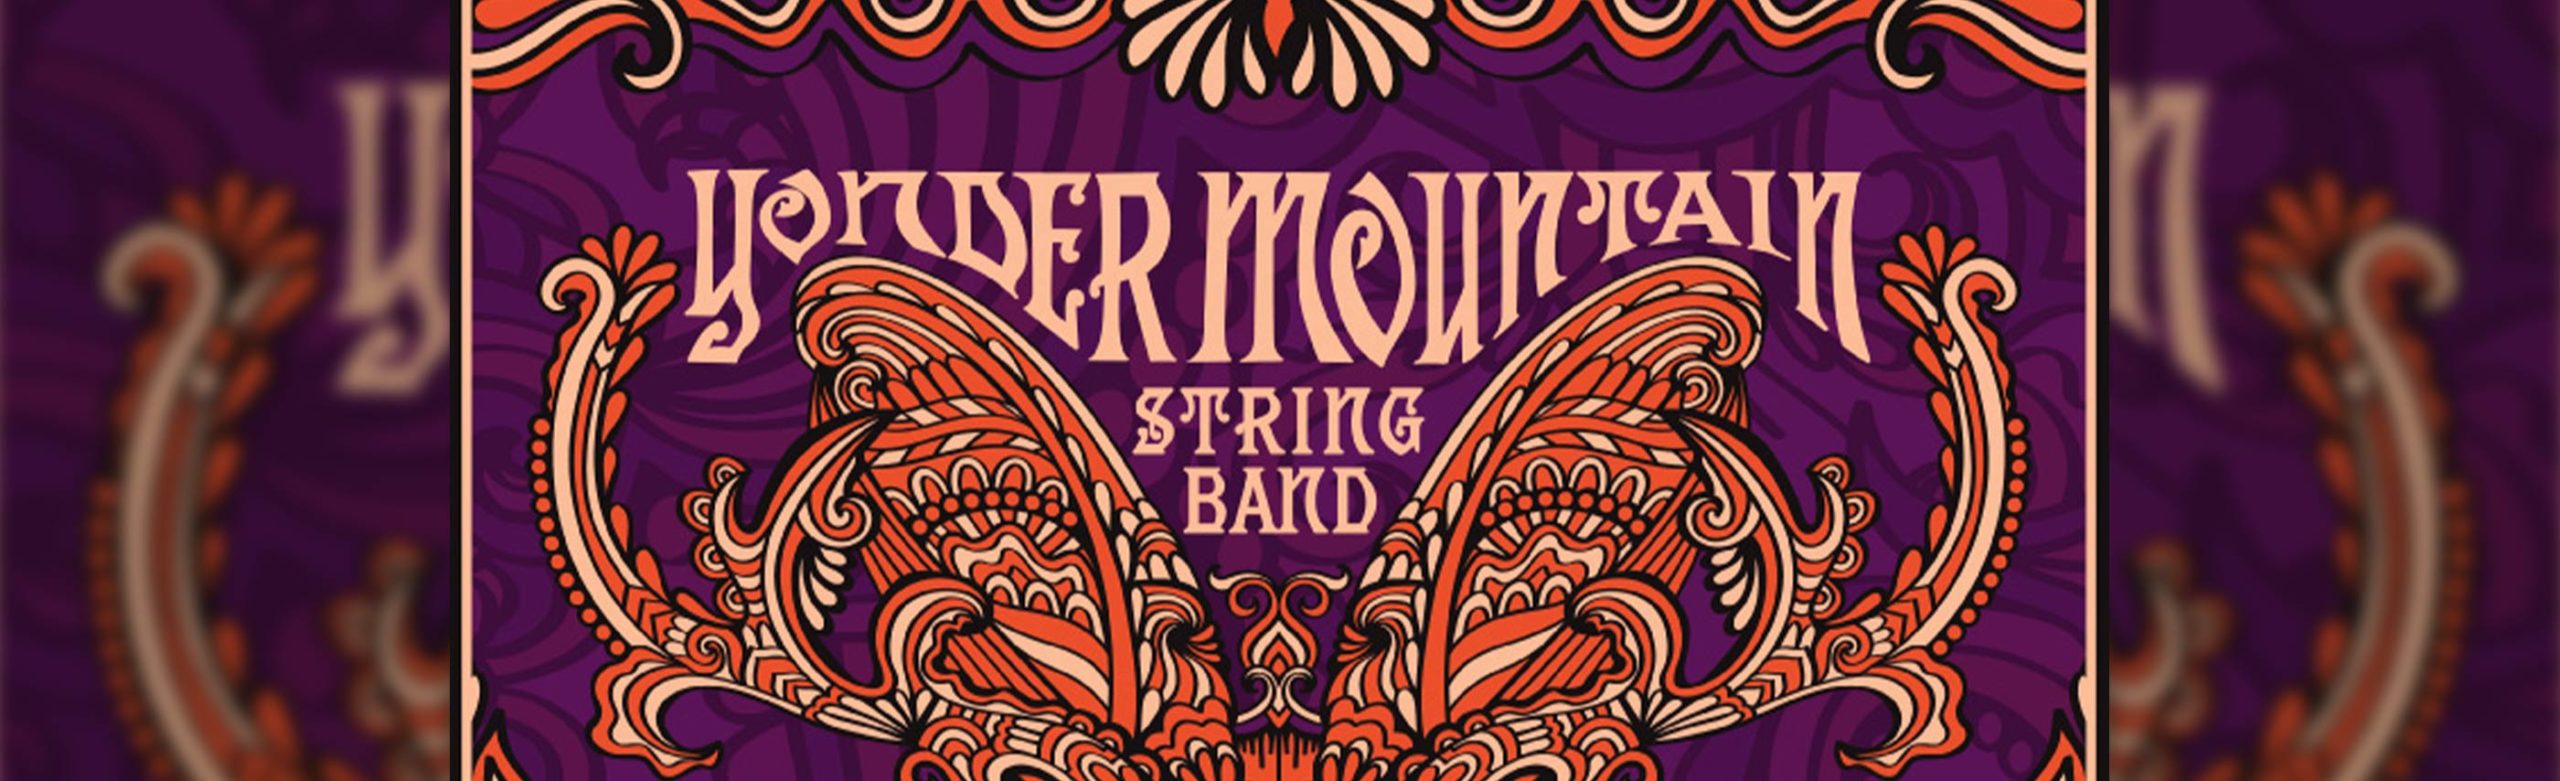 Event Info: Yonder Mountain String Band at The Wilma 2022 Image